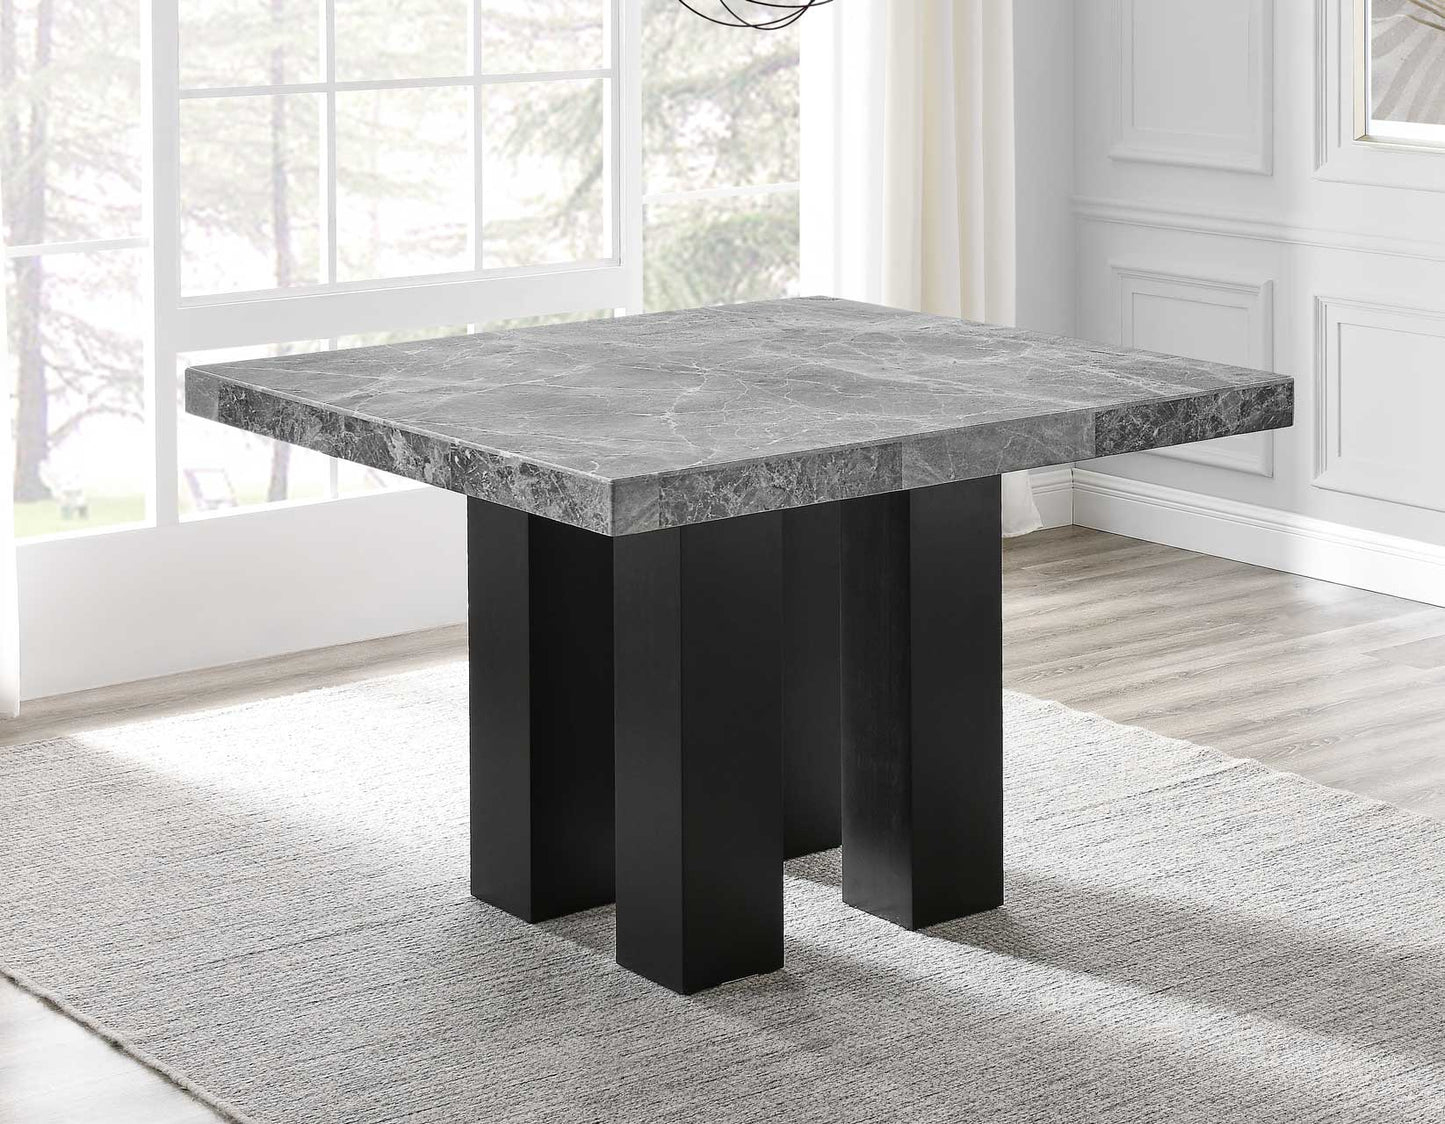 Camila Gray Marble 7-Piece Counter Dining Group
(Counter Table & 6 Counter Chairs)